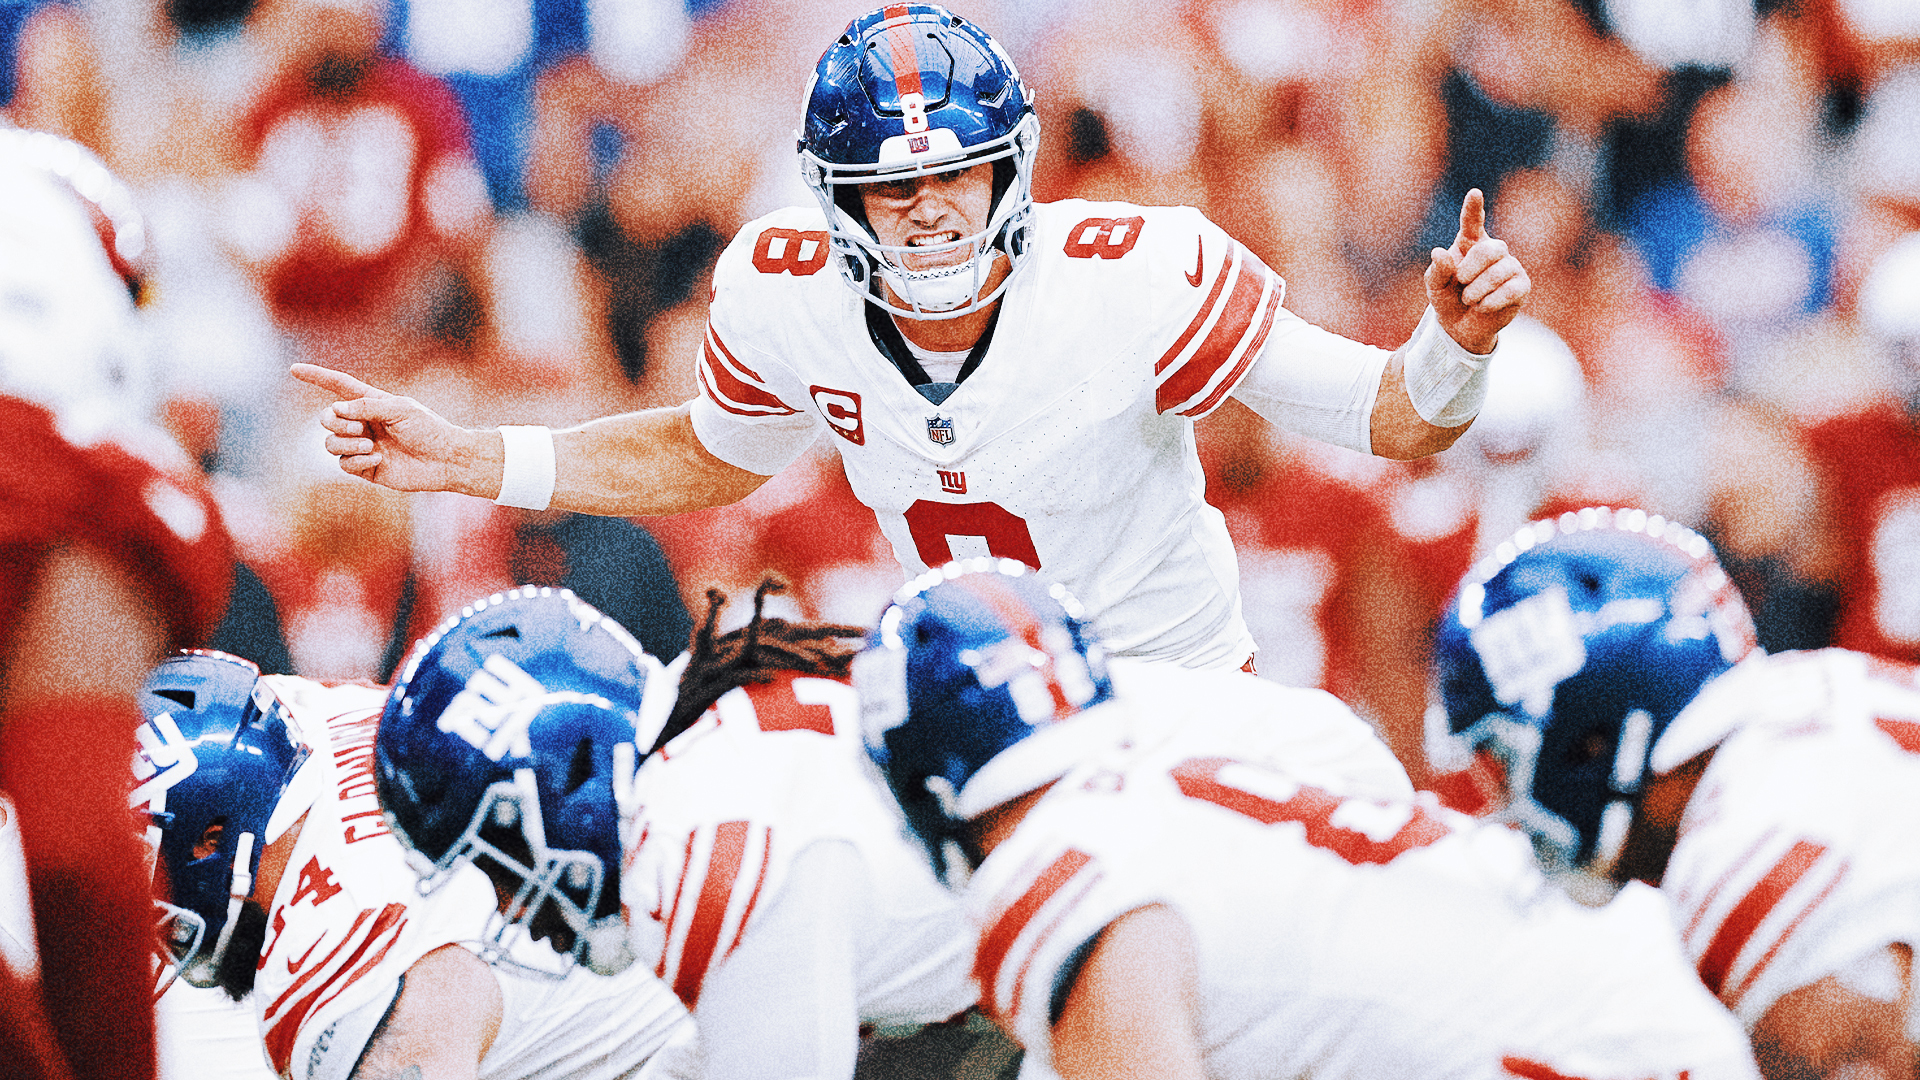 New York Giants rally from a 21-point deficit to beat Cardinals 31-28